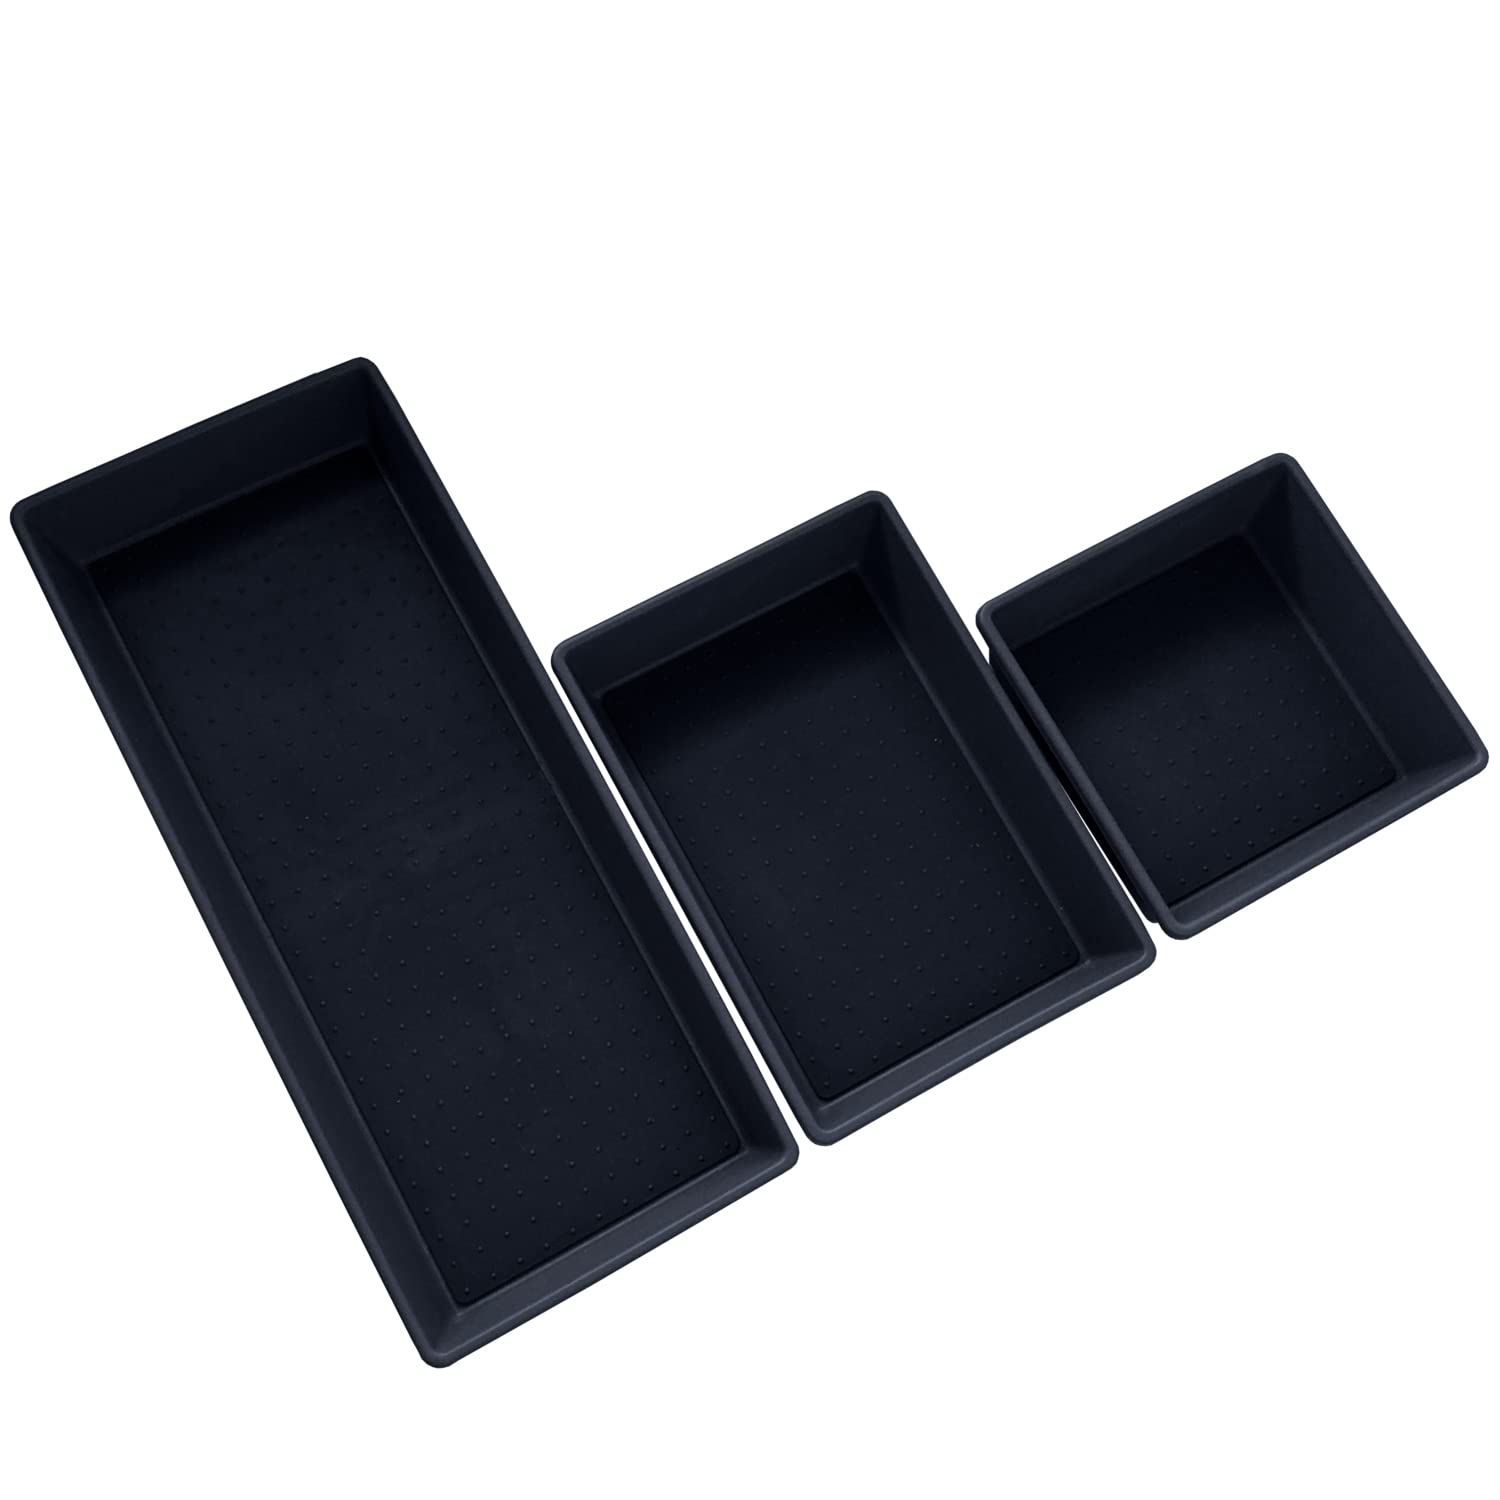 Tray Bins 3 Pack Multi Use Storage for Kitchen Drawers, Office and Bathroom Non-Slip Durable Rubber Lining - Large Navy Blue